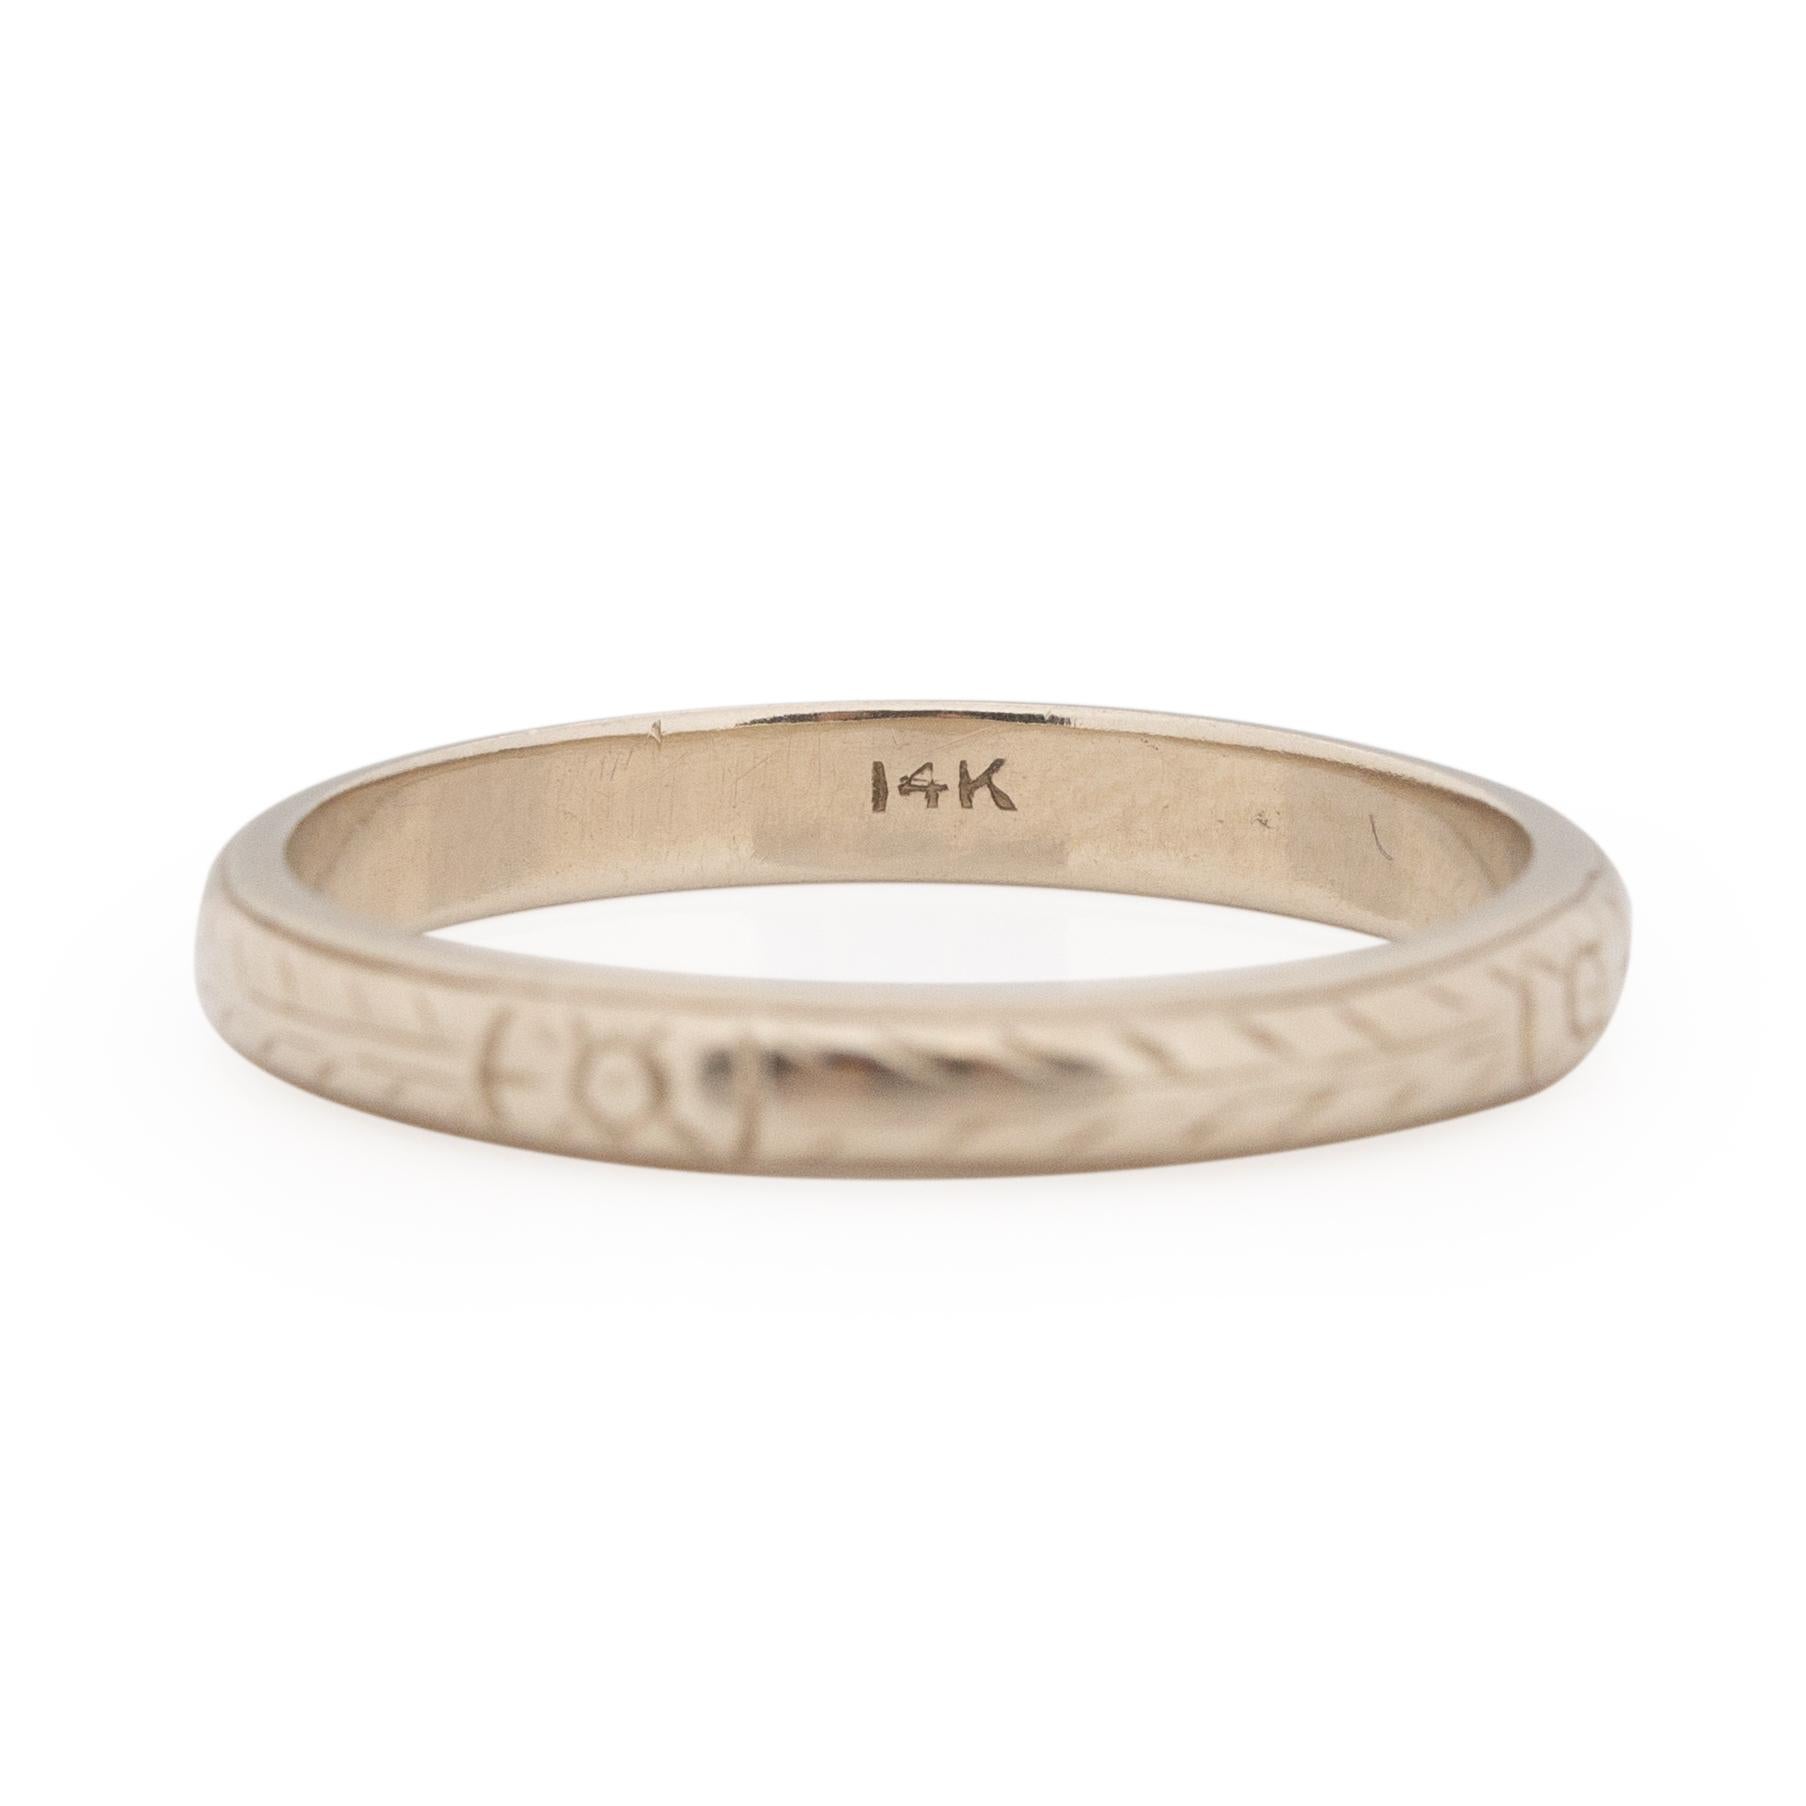 This little floral engraved beauty is a fun little pop of engraving, but still subtle and elegant. This ring is crafted in 14K white gold, the paleness of the white gold is a wonderful compliment to the delicate floral and braded engraving. This